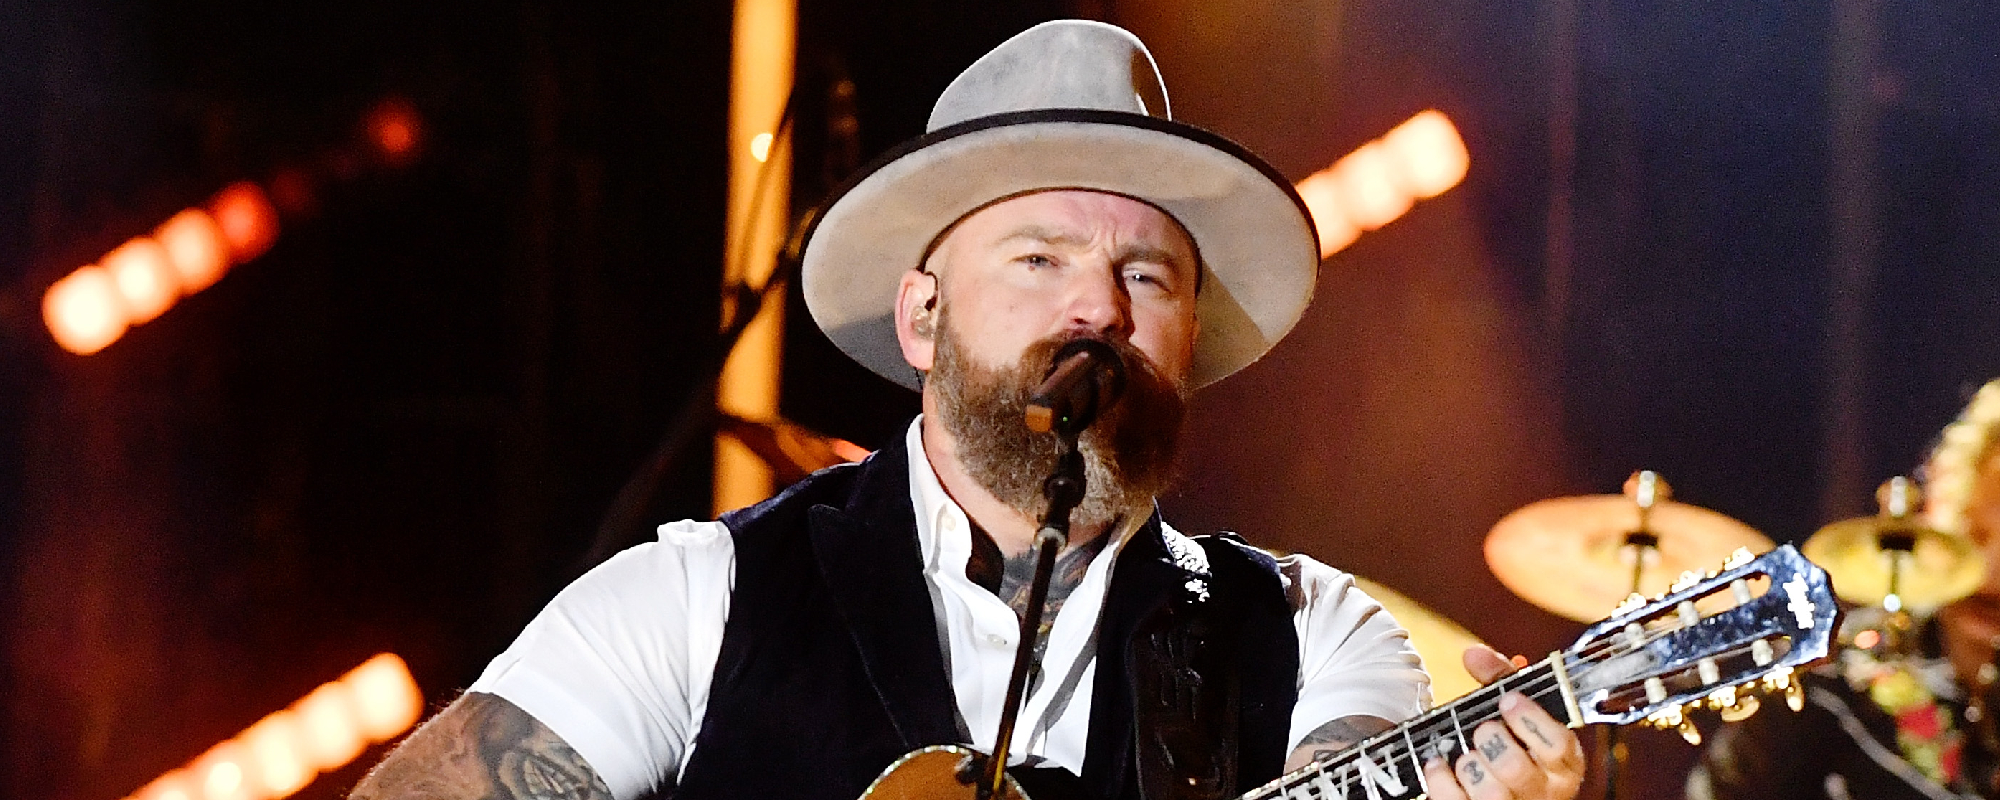 Zac Brown Band Teams Up with Mac McAnally for Special Jimmy Buffett Tribute